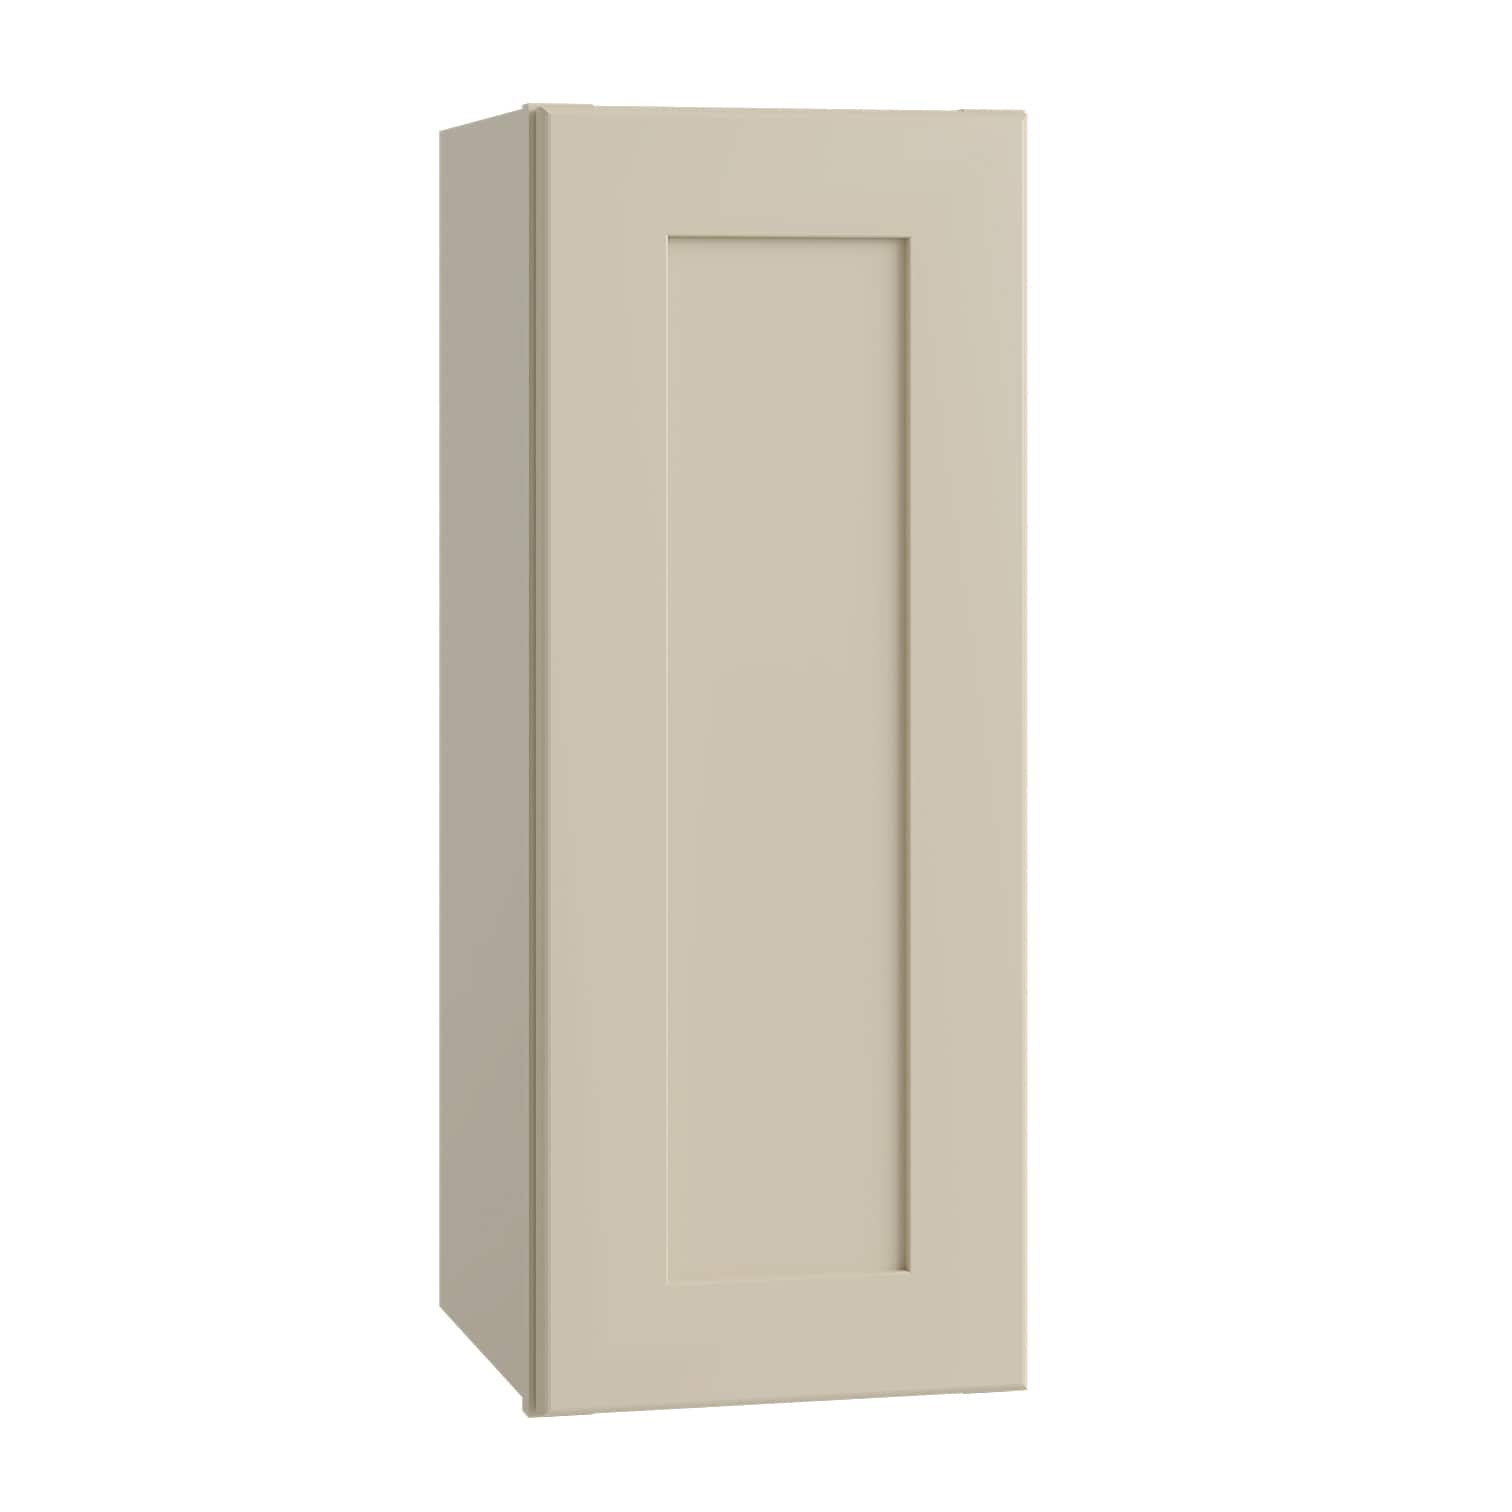 Luxxe Cabinetry 9-in W x 30-in H x 12-in D Norfolk Blended Cream Painted Door Wall Fully Assembled Semi-custom Cabinet in Off-White | W0930L-NBC